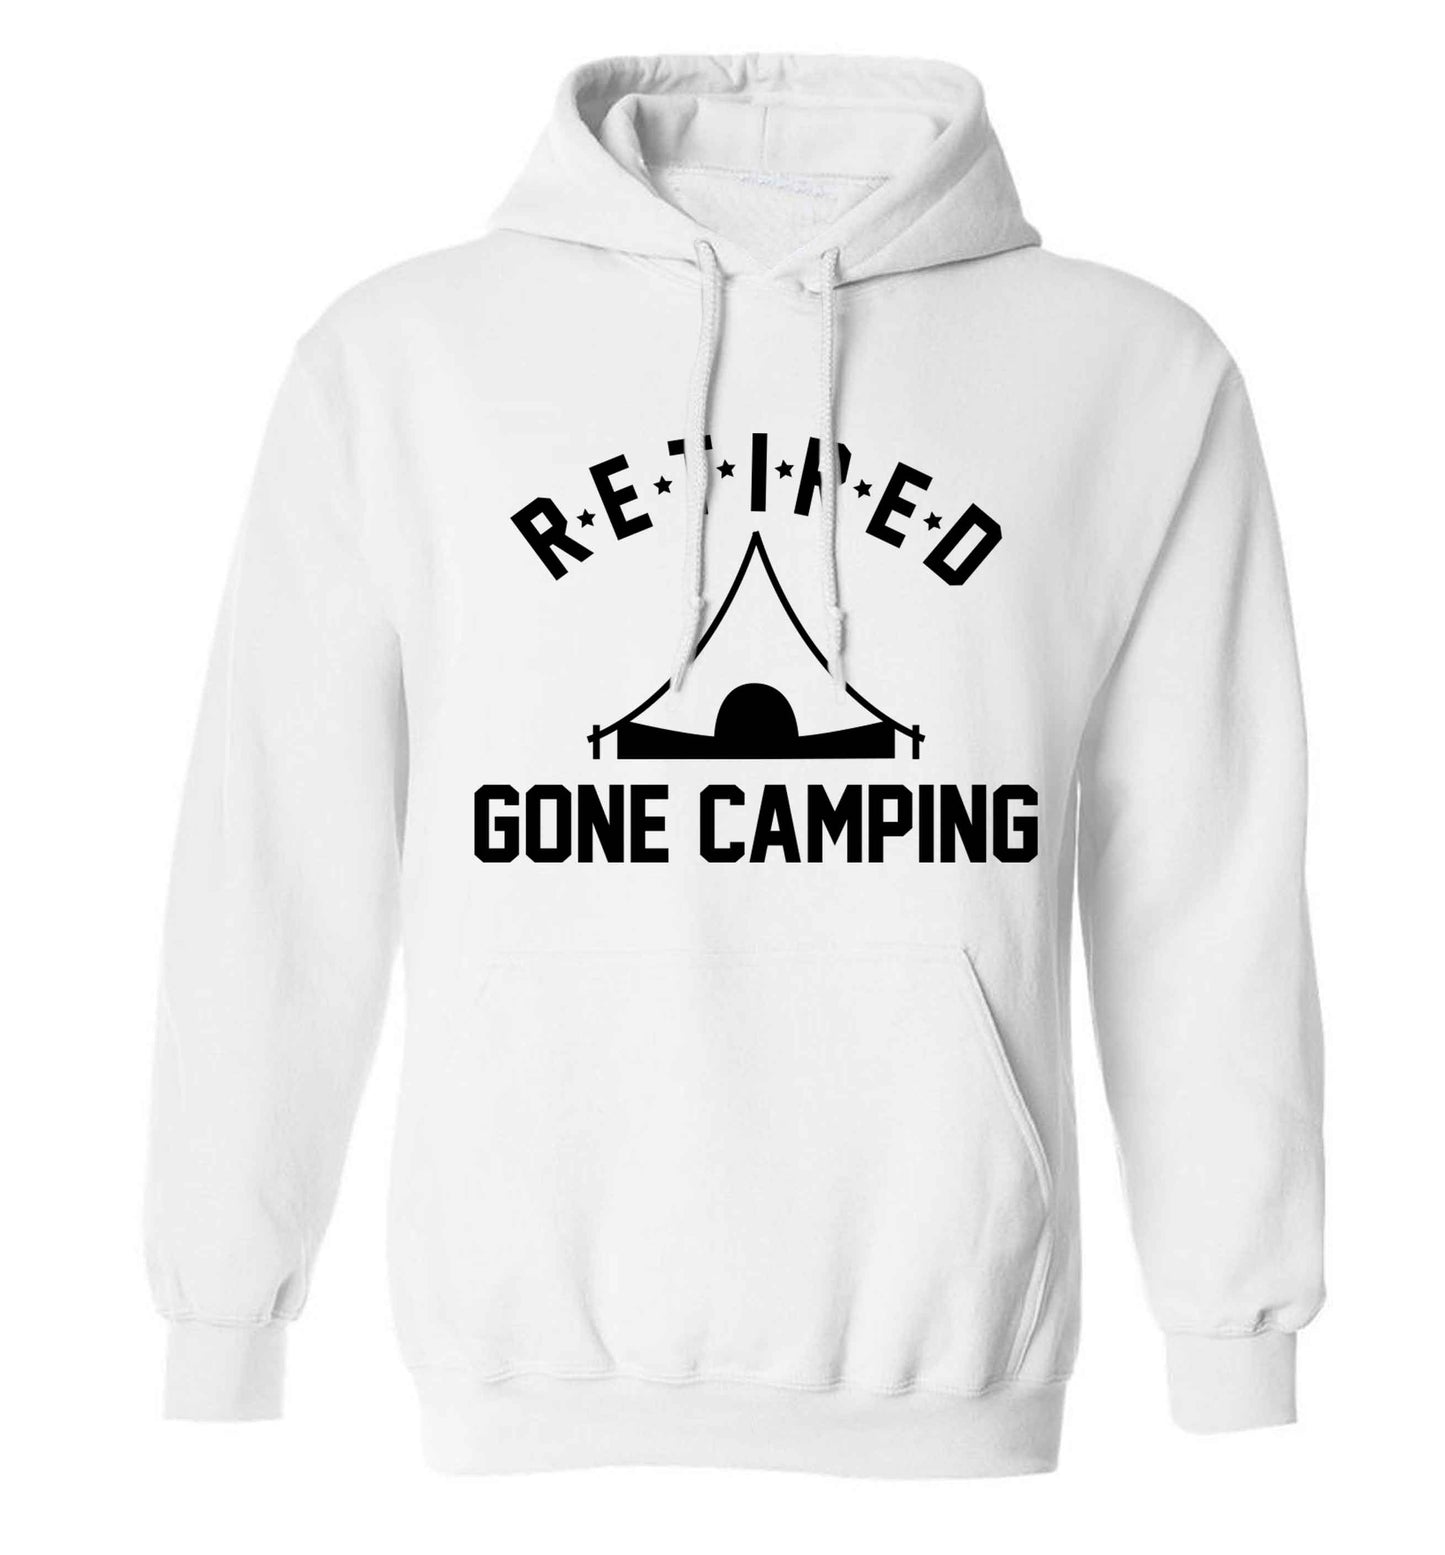 Retired gone camping adults unisex white hoodie 2XL